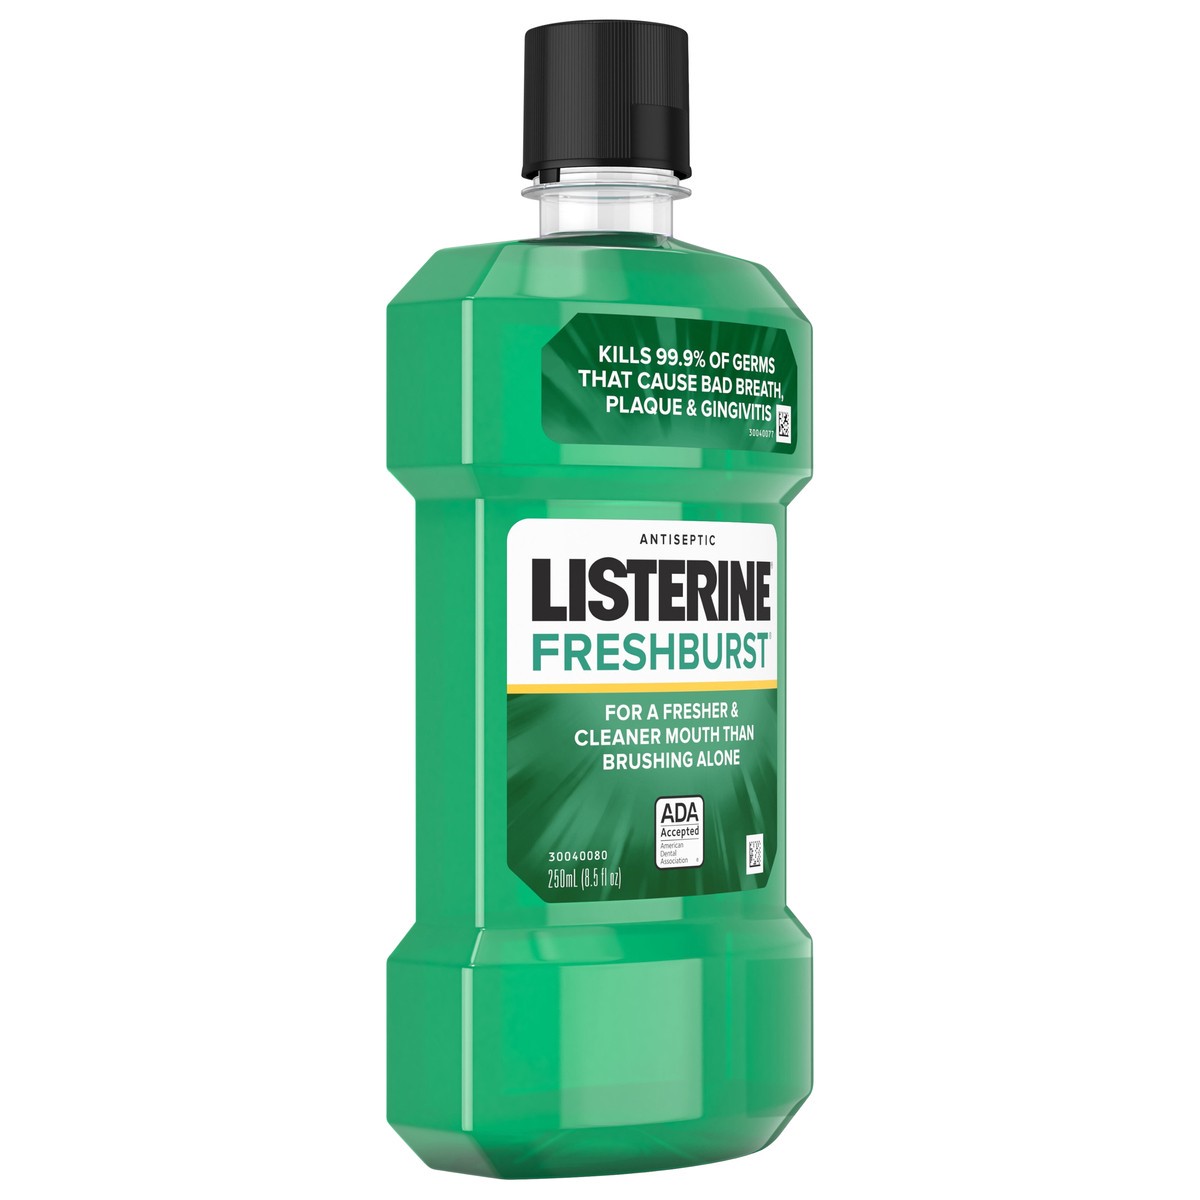 slide 2 of 7, Listerine Freshburst Antiseptic Mouthwash for Bad Breath, Kills 99% of Germs that Cause Bad Breath & Fight Plaque & Gingivitis, ADA Accepted Mouthwash, Spearmint, 250 ml